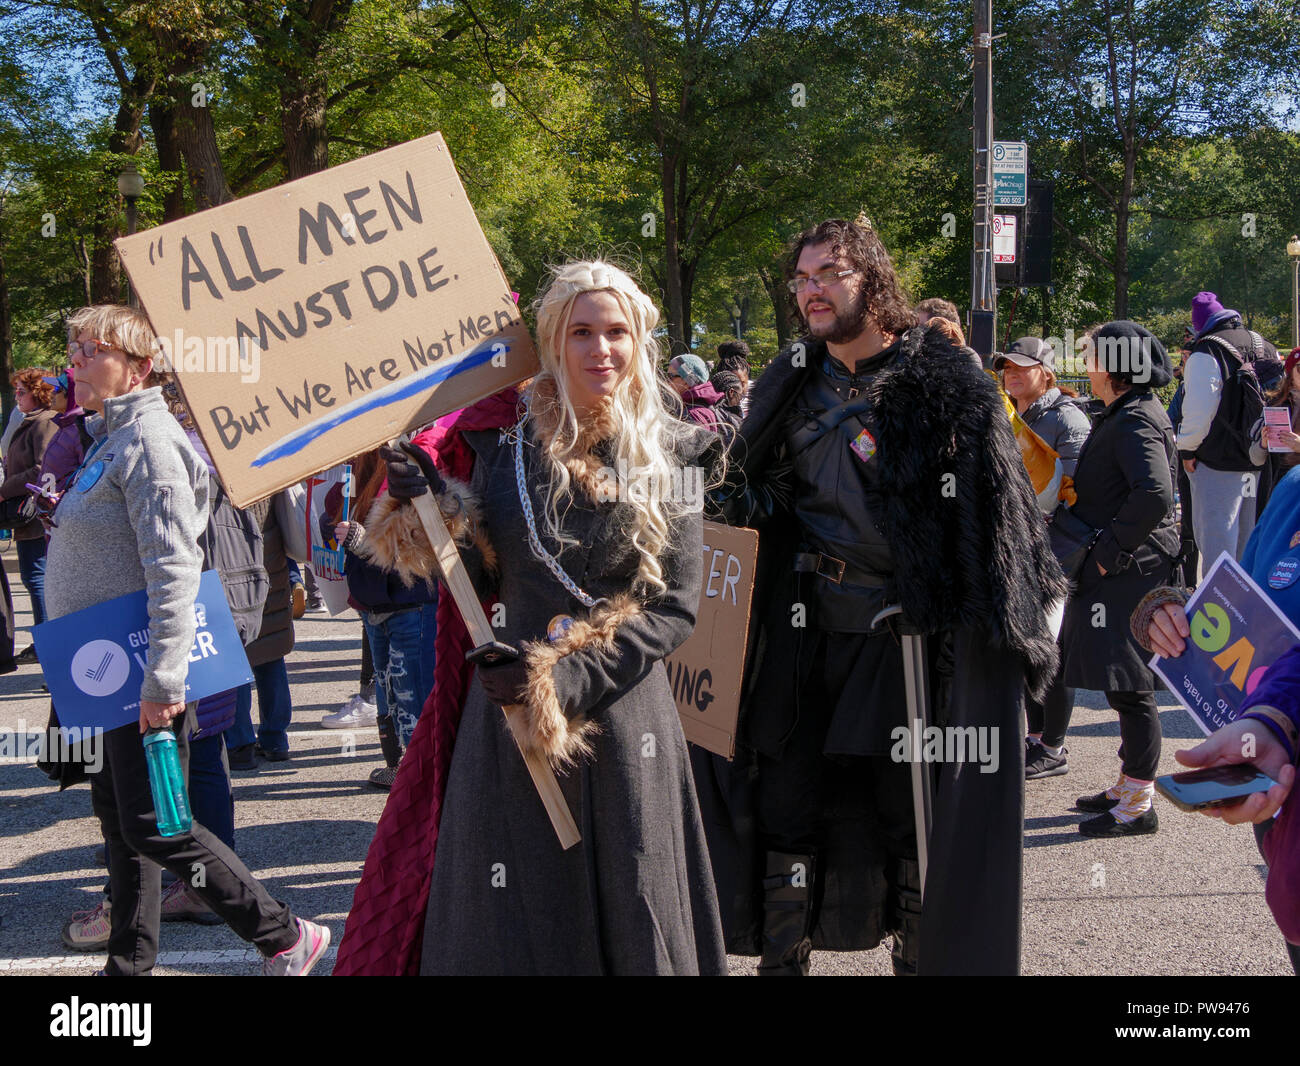 Chicago, Illinois, USA. 13th October 2018. Protesters costumed as Daenerys Targaryen and John Snow from the television show 'Game of Thrones' at today's women's rally. Credit: Todd Bannor/Alamy Live News Stock Photo